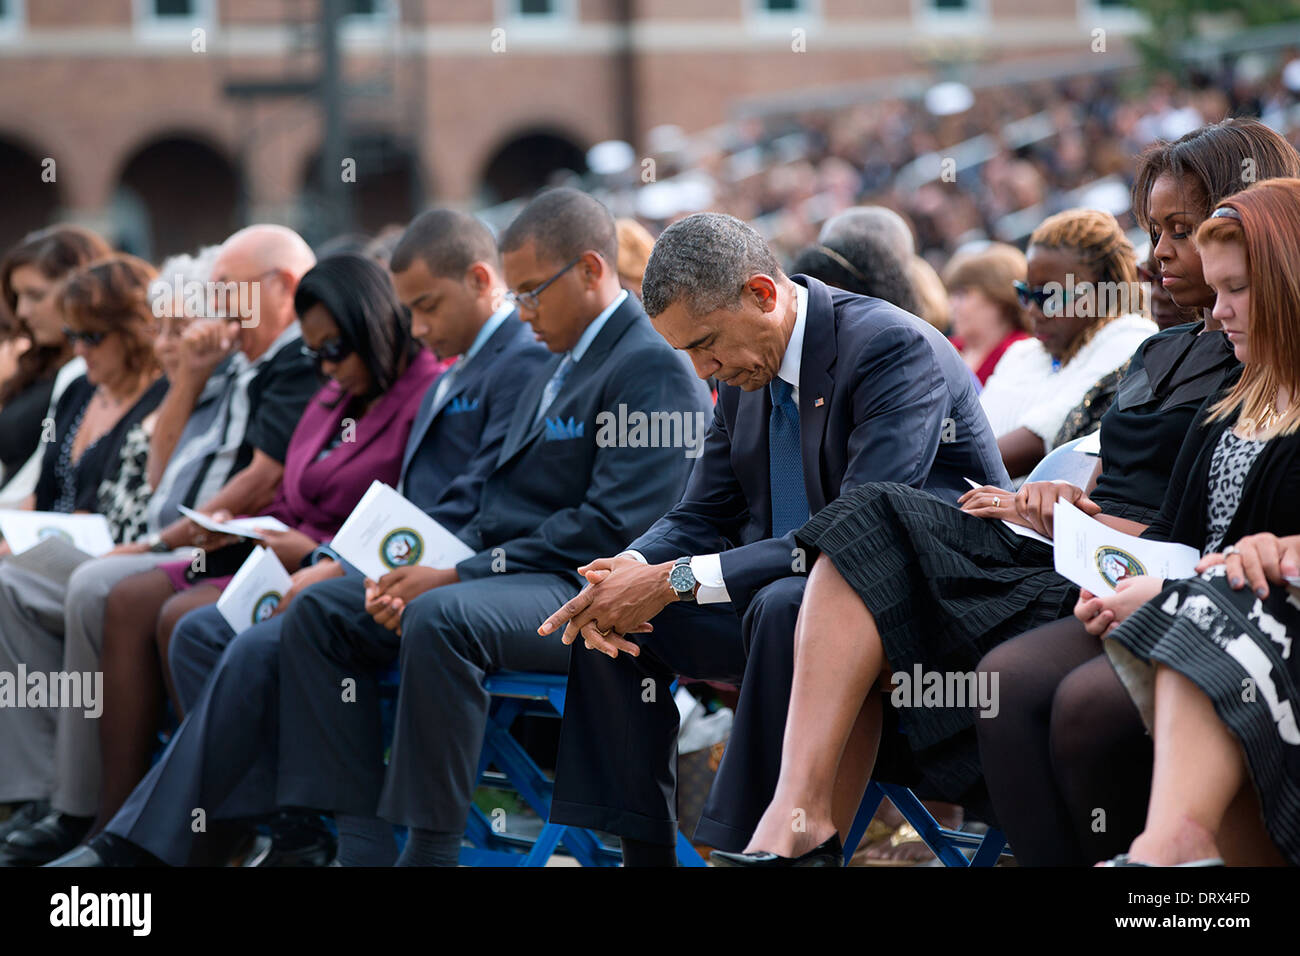 US President Barack Obama and First Lady Michelle Obama attend a memorial service for victims of the Washington Navy Yard shootings at the Parade Grounds, Marine Barracks September 22, 2013 in Washington, DC. Stock Photo